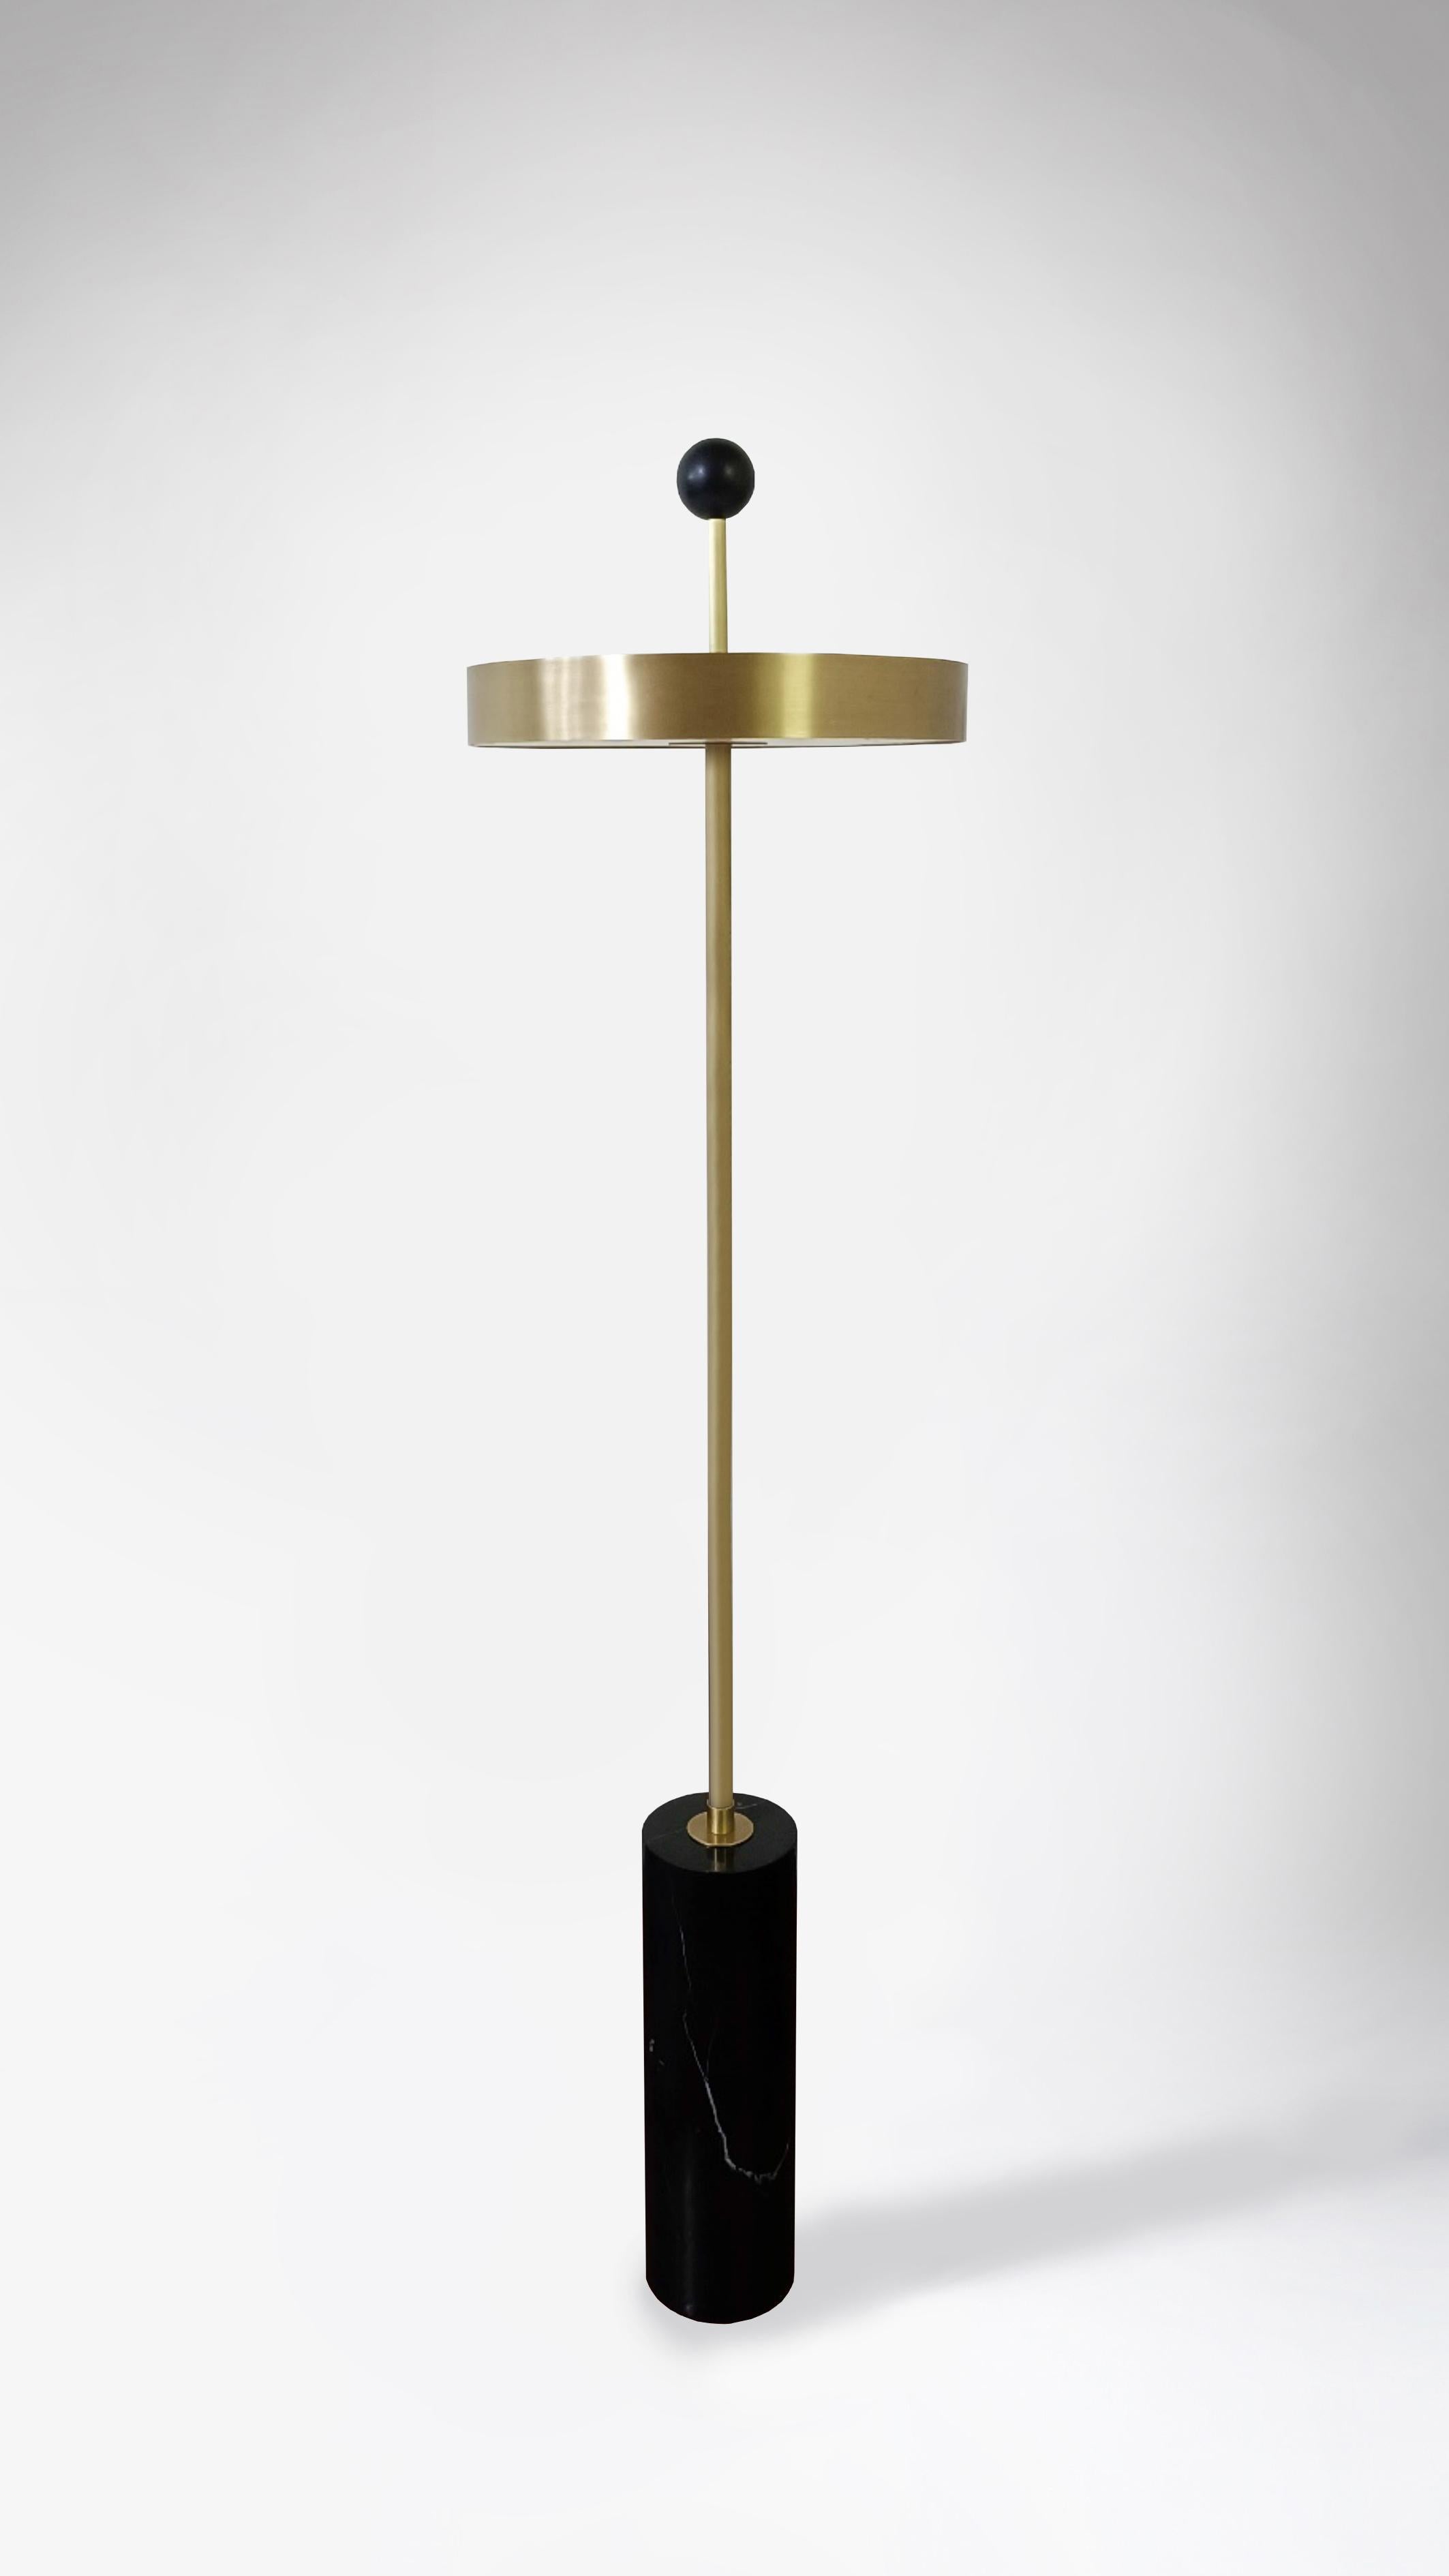 Disc and ball floor lamp by square in circle
Dimensions: H 165 x W 40 cm
Materials: Brushed brass finish, Black marble, powder coated black, opaque white acrylic diffuser

A statement floor lamp with a disc-shaped shade, allowing the light to